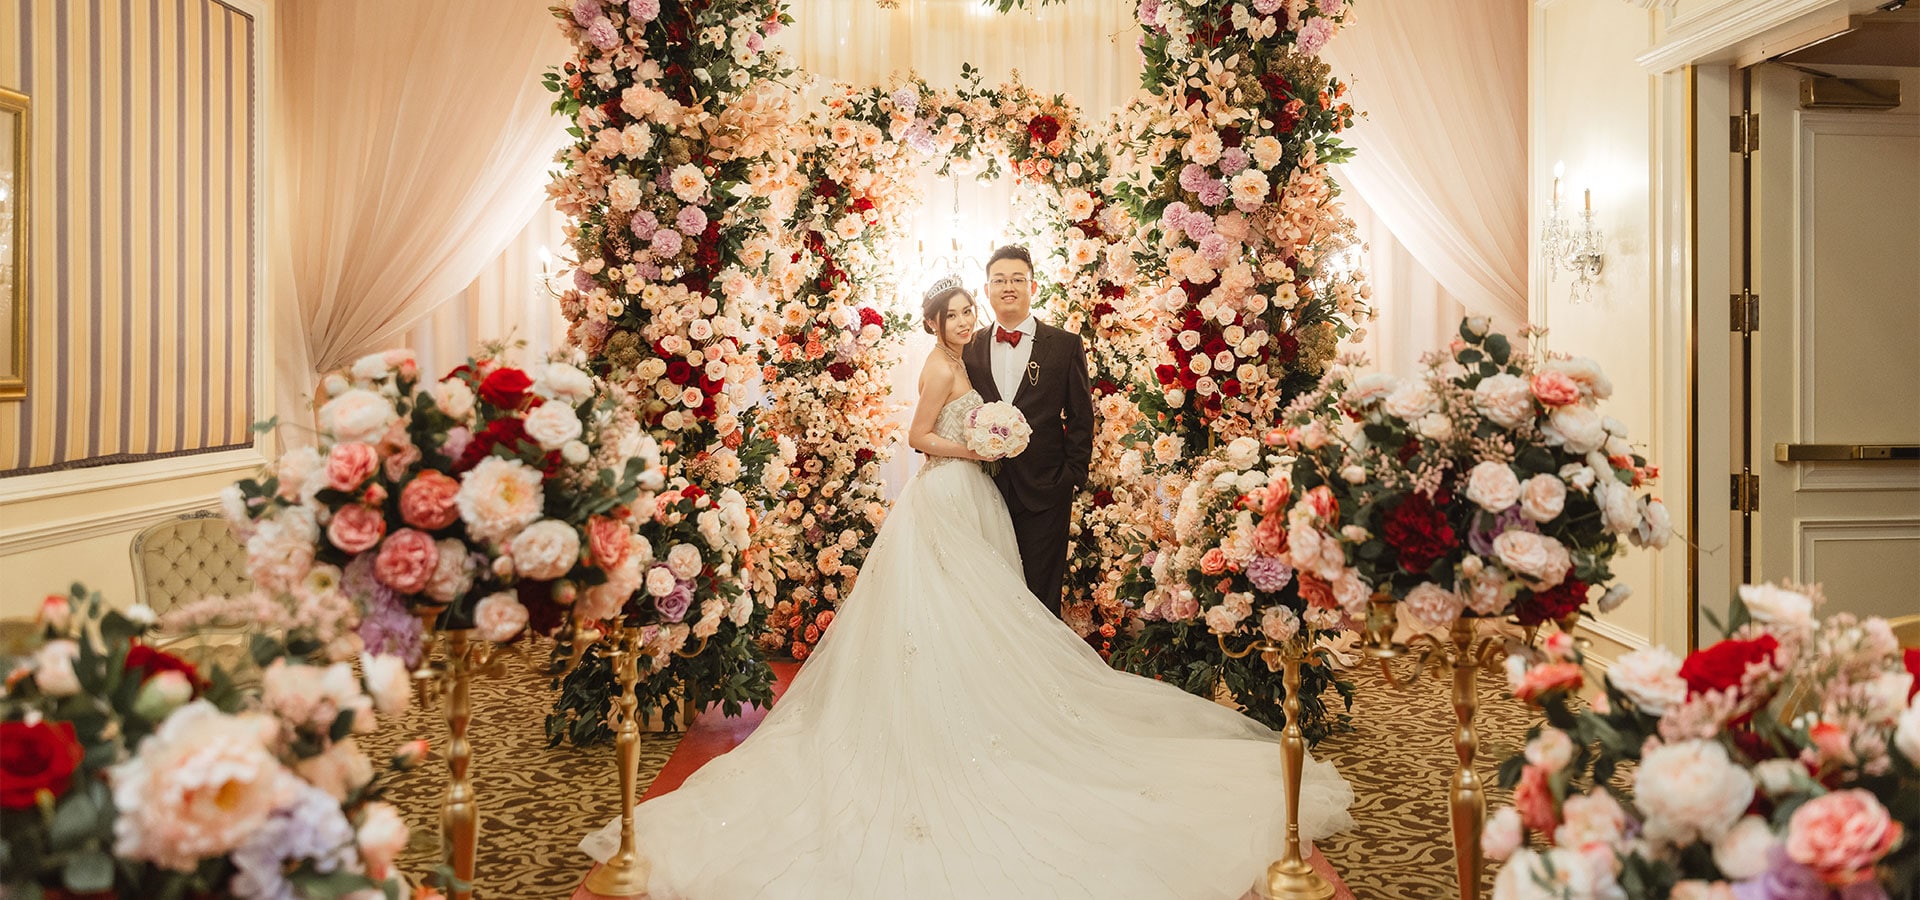 Hero image for Kefei and Aiqi’s fairy-tale wedding at the Fairmont Royal York